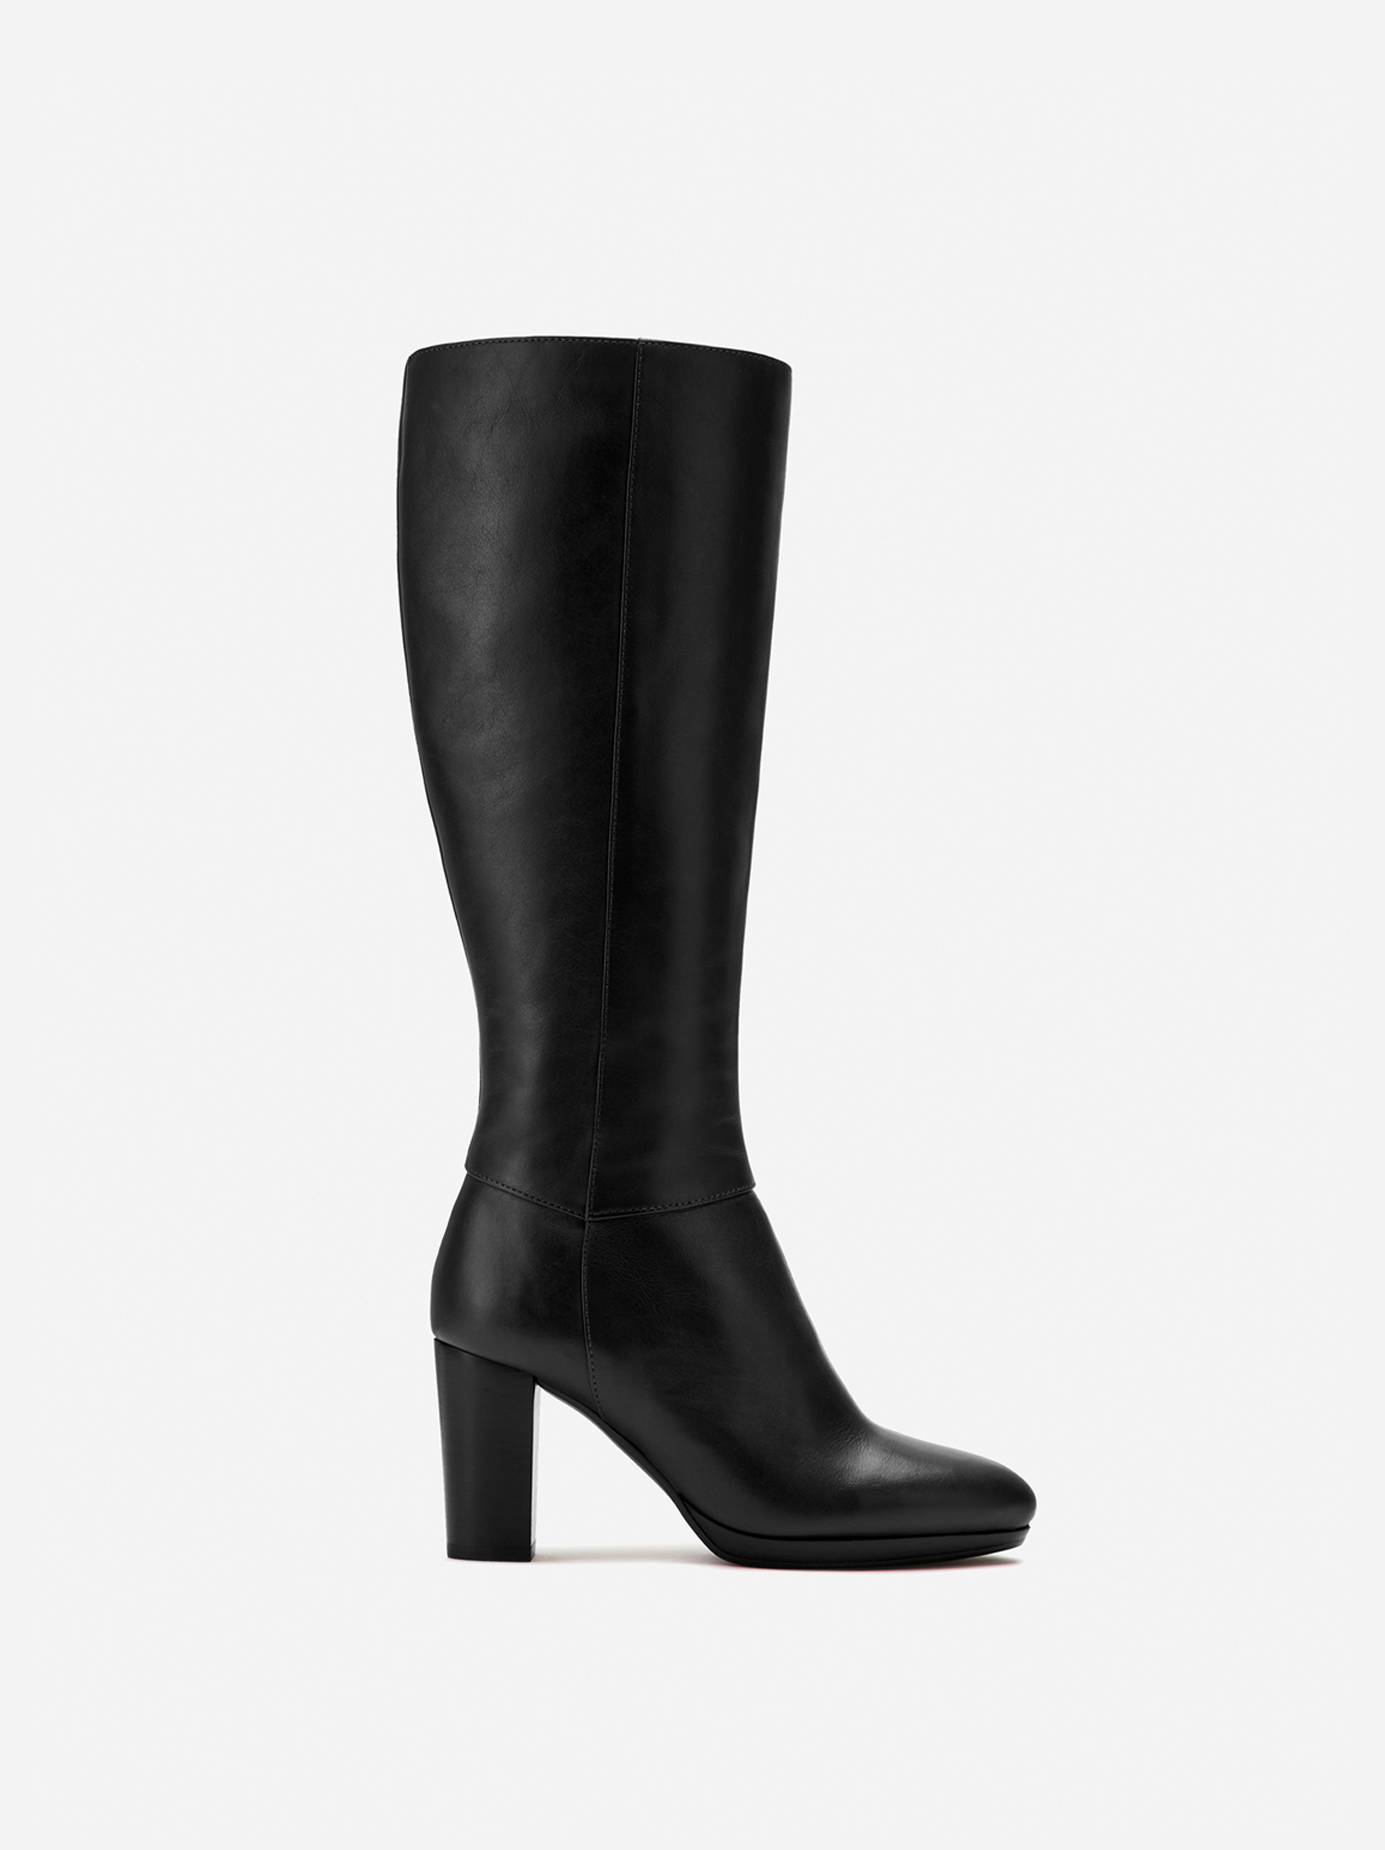 Belmore Black Leather Platform Boot | DuoBoots | Fit Beautifully